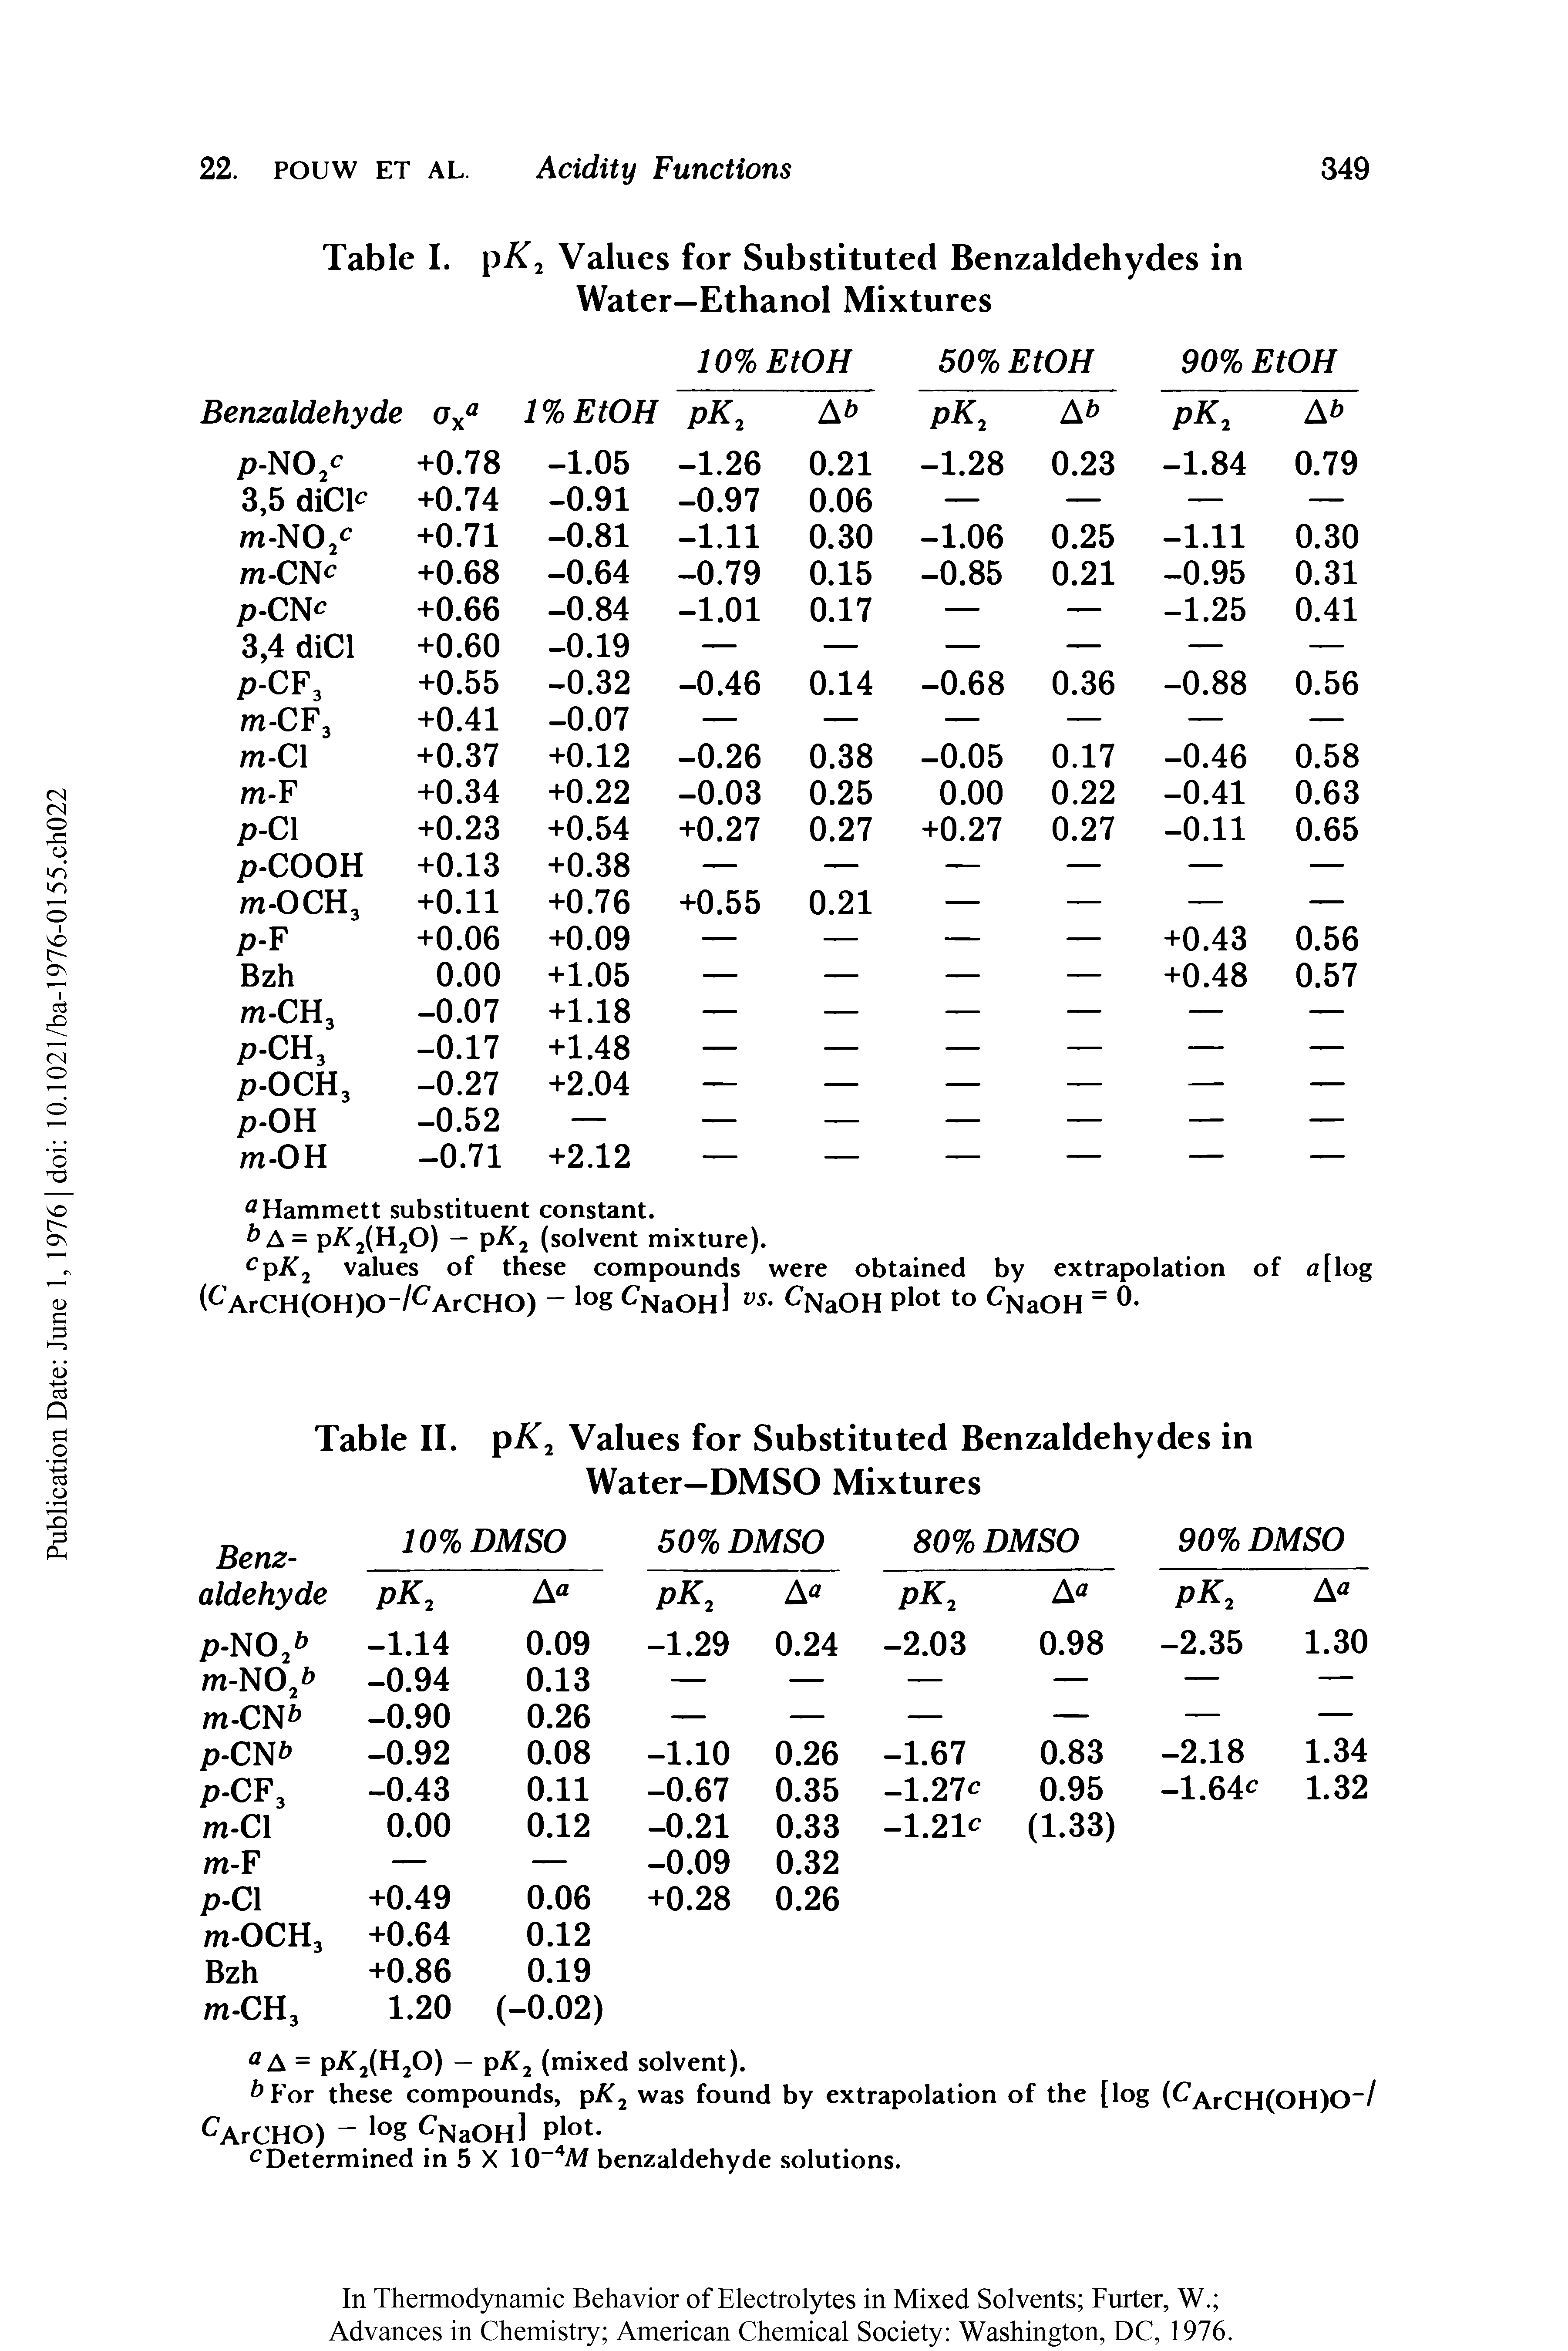 Table II. pK2 Values for Substituted Benzaldehydes in Water—DMSO Mixtures...